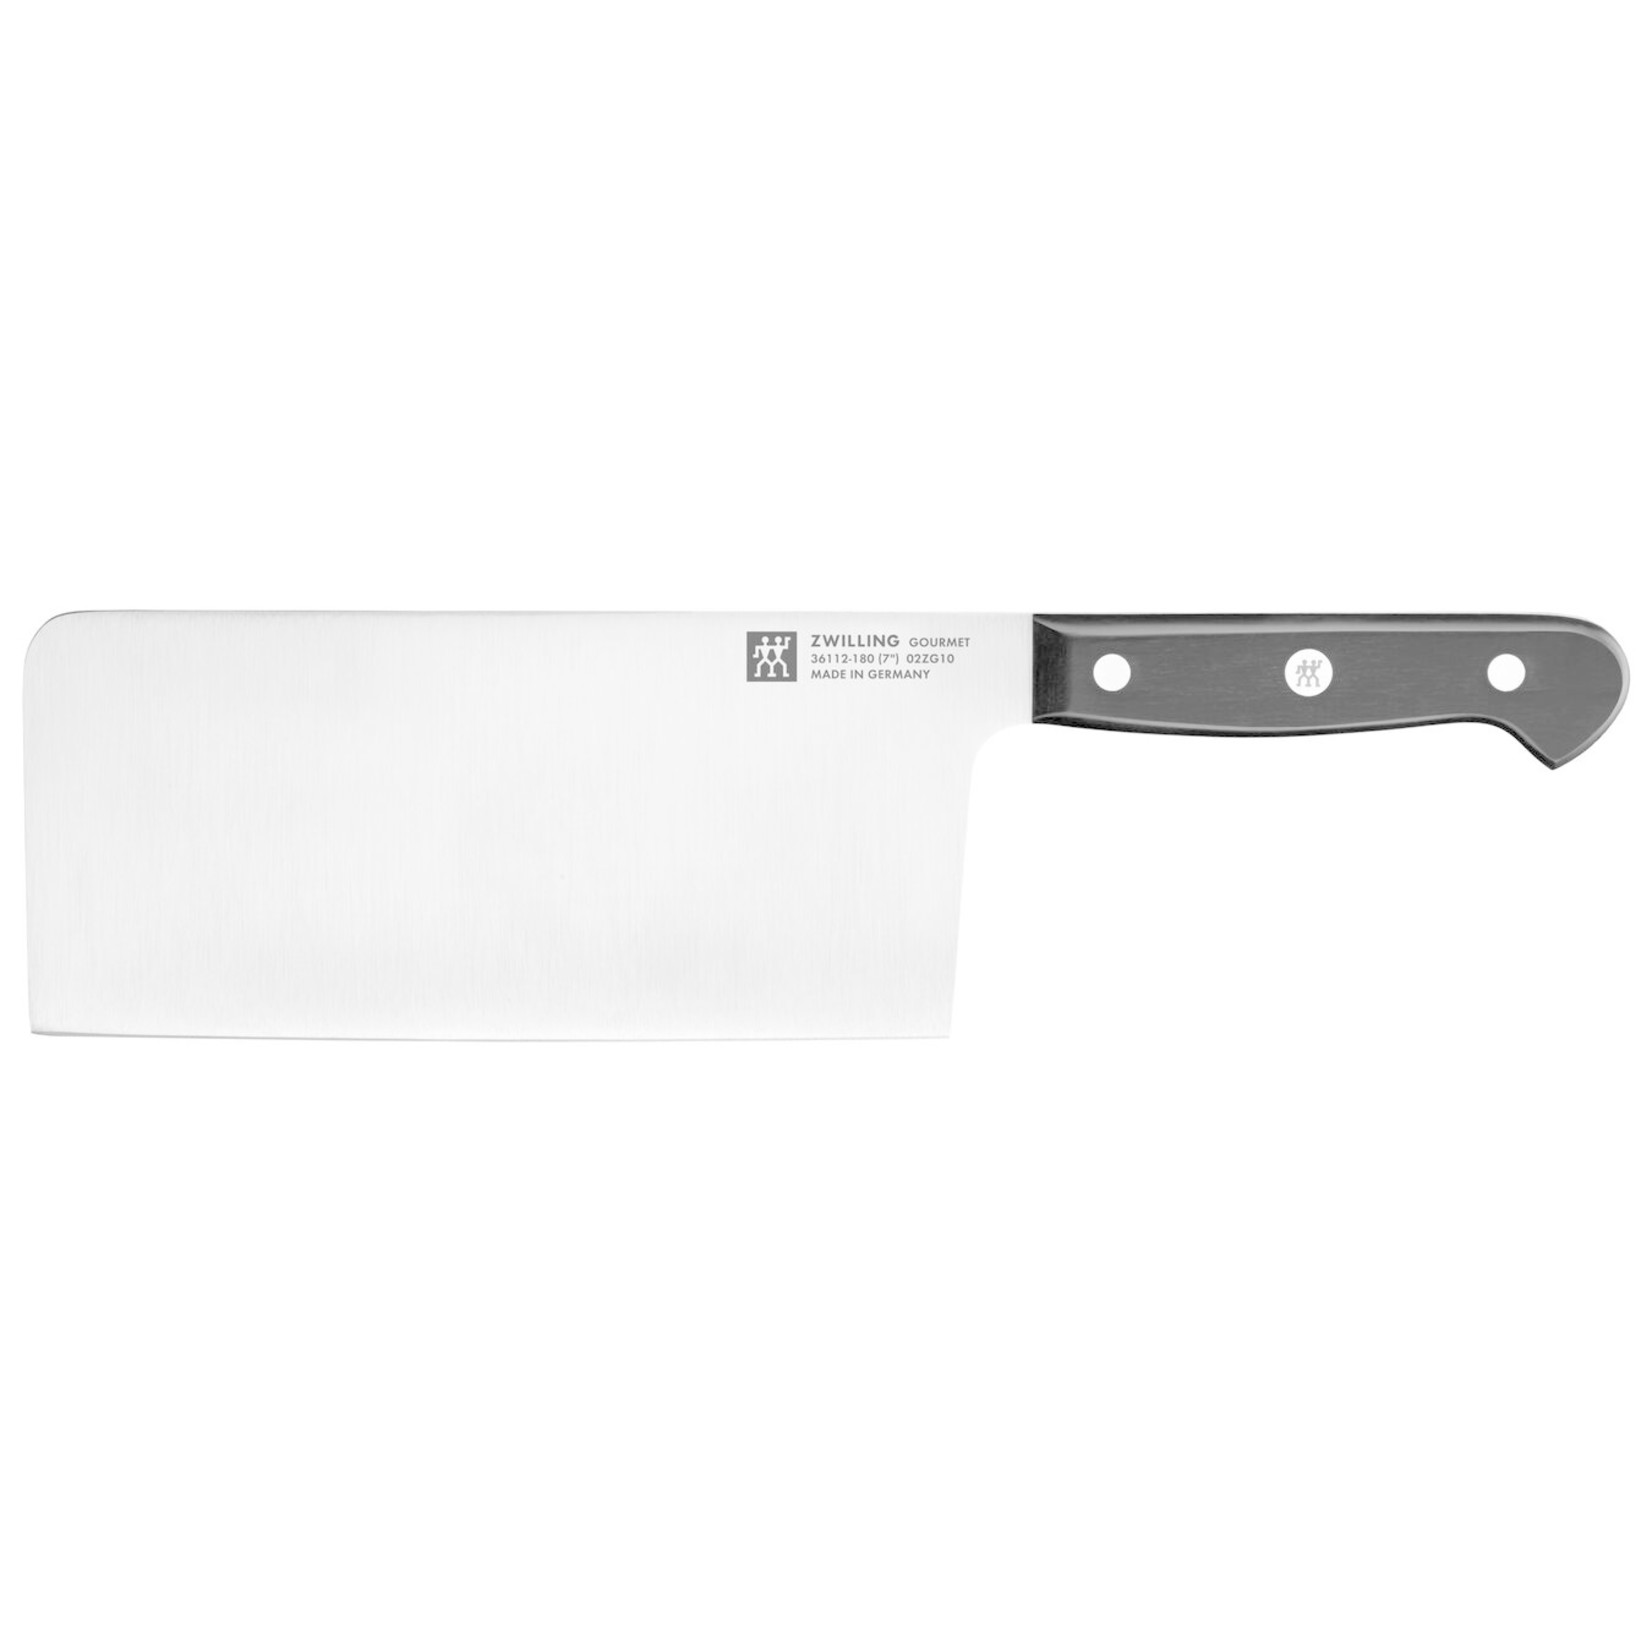 ZWILLING J.A. HENCKELS 36112-181  -  COUTEAU CHEF CHINOIS 7'' GOURMET ZWILLING